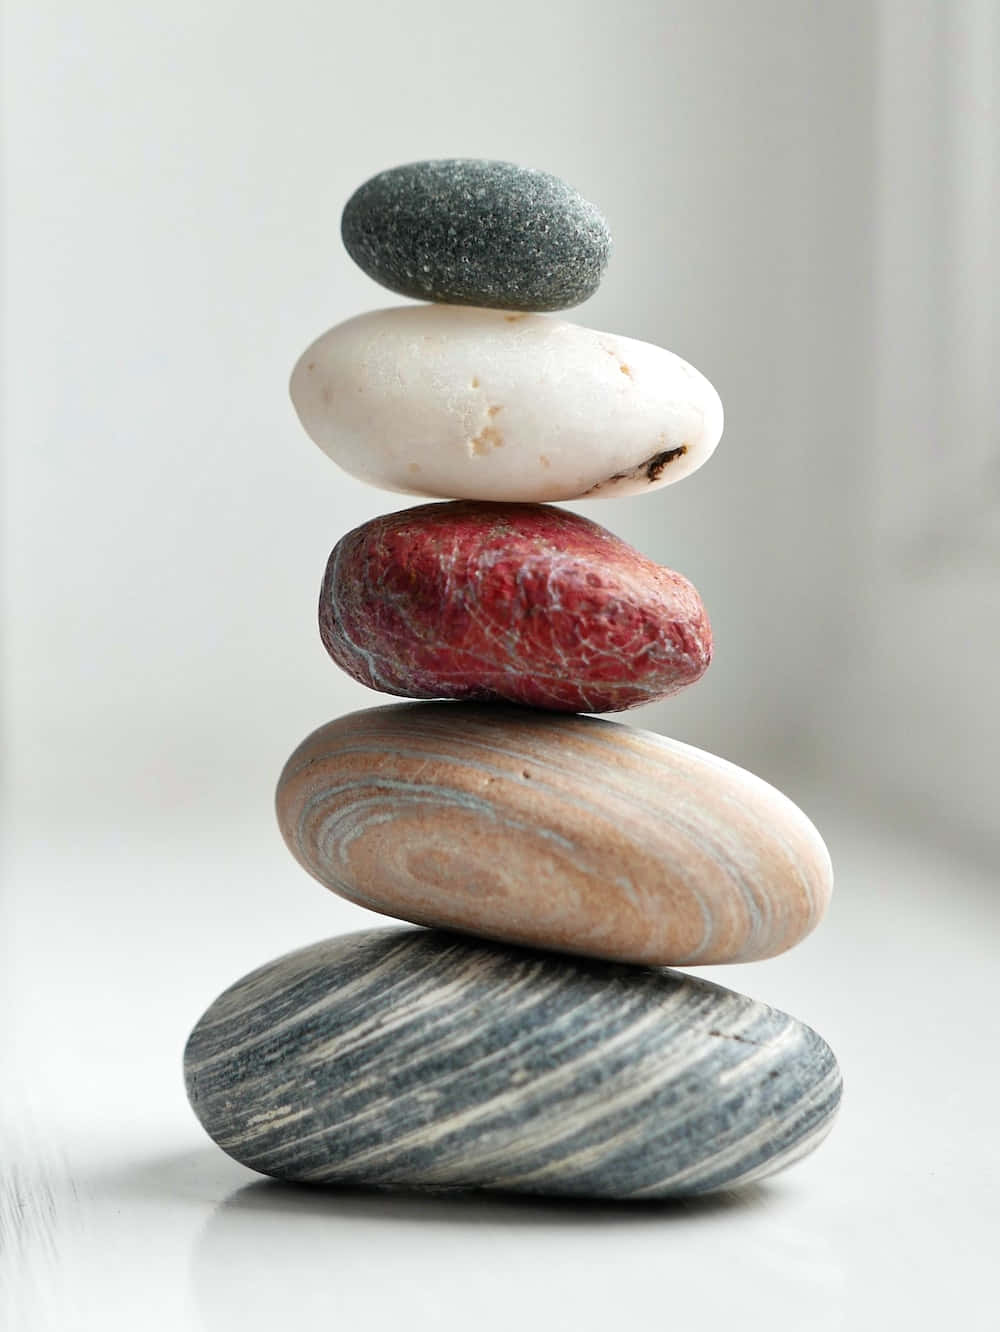 A Stack Of Stones On A White Table